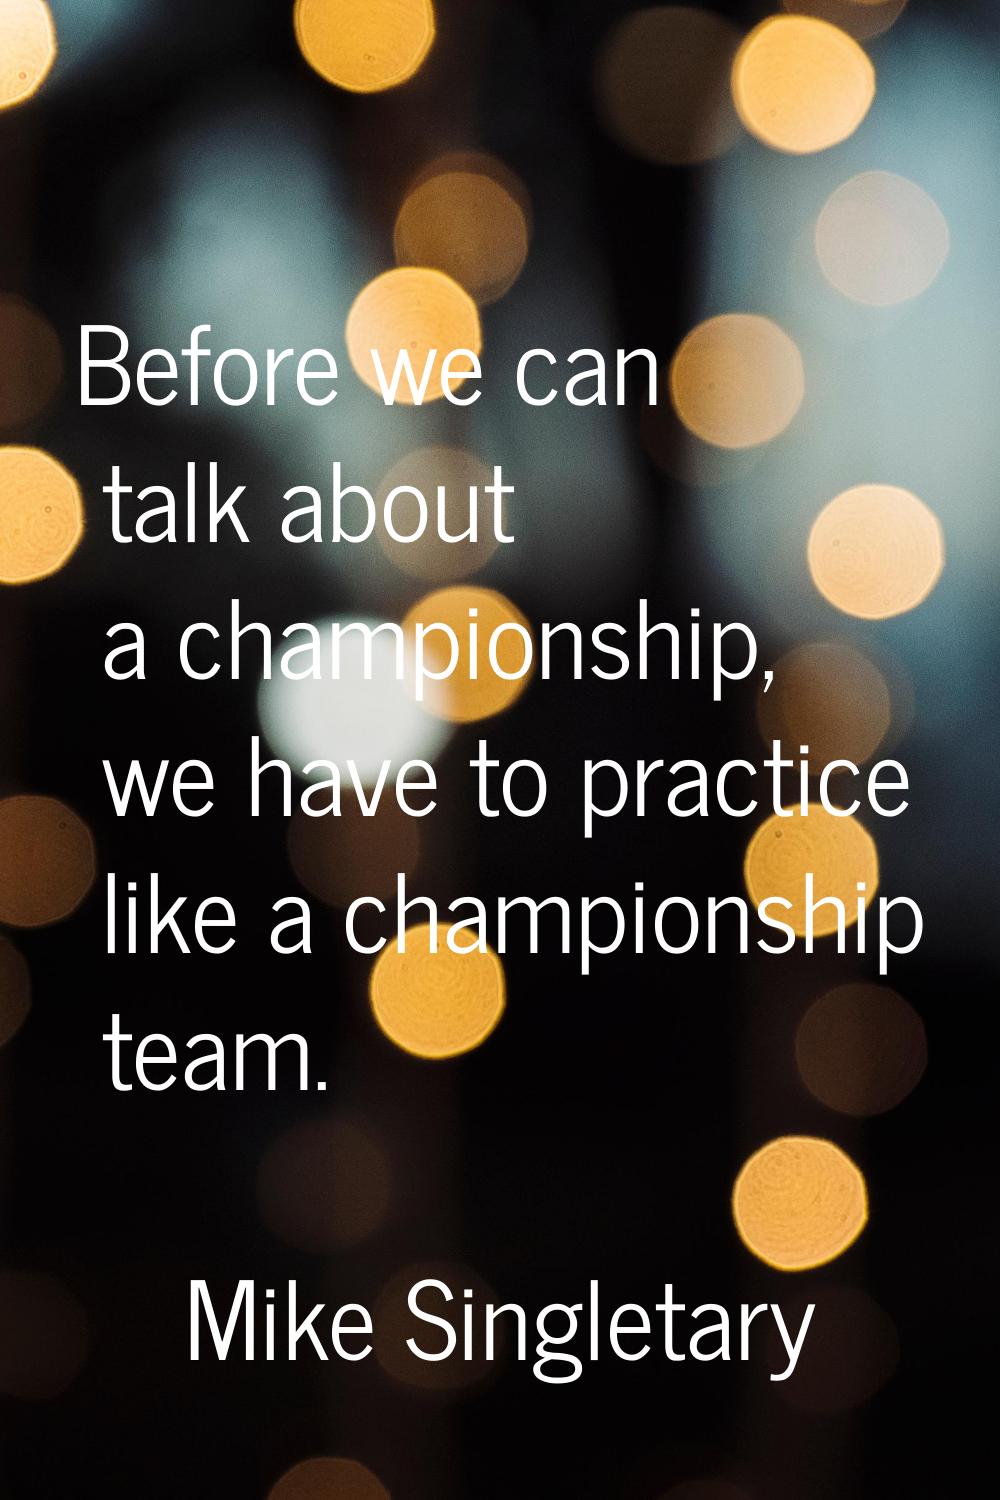 Before we can talk about a championship, we have to practice like a championship team.